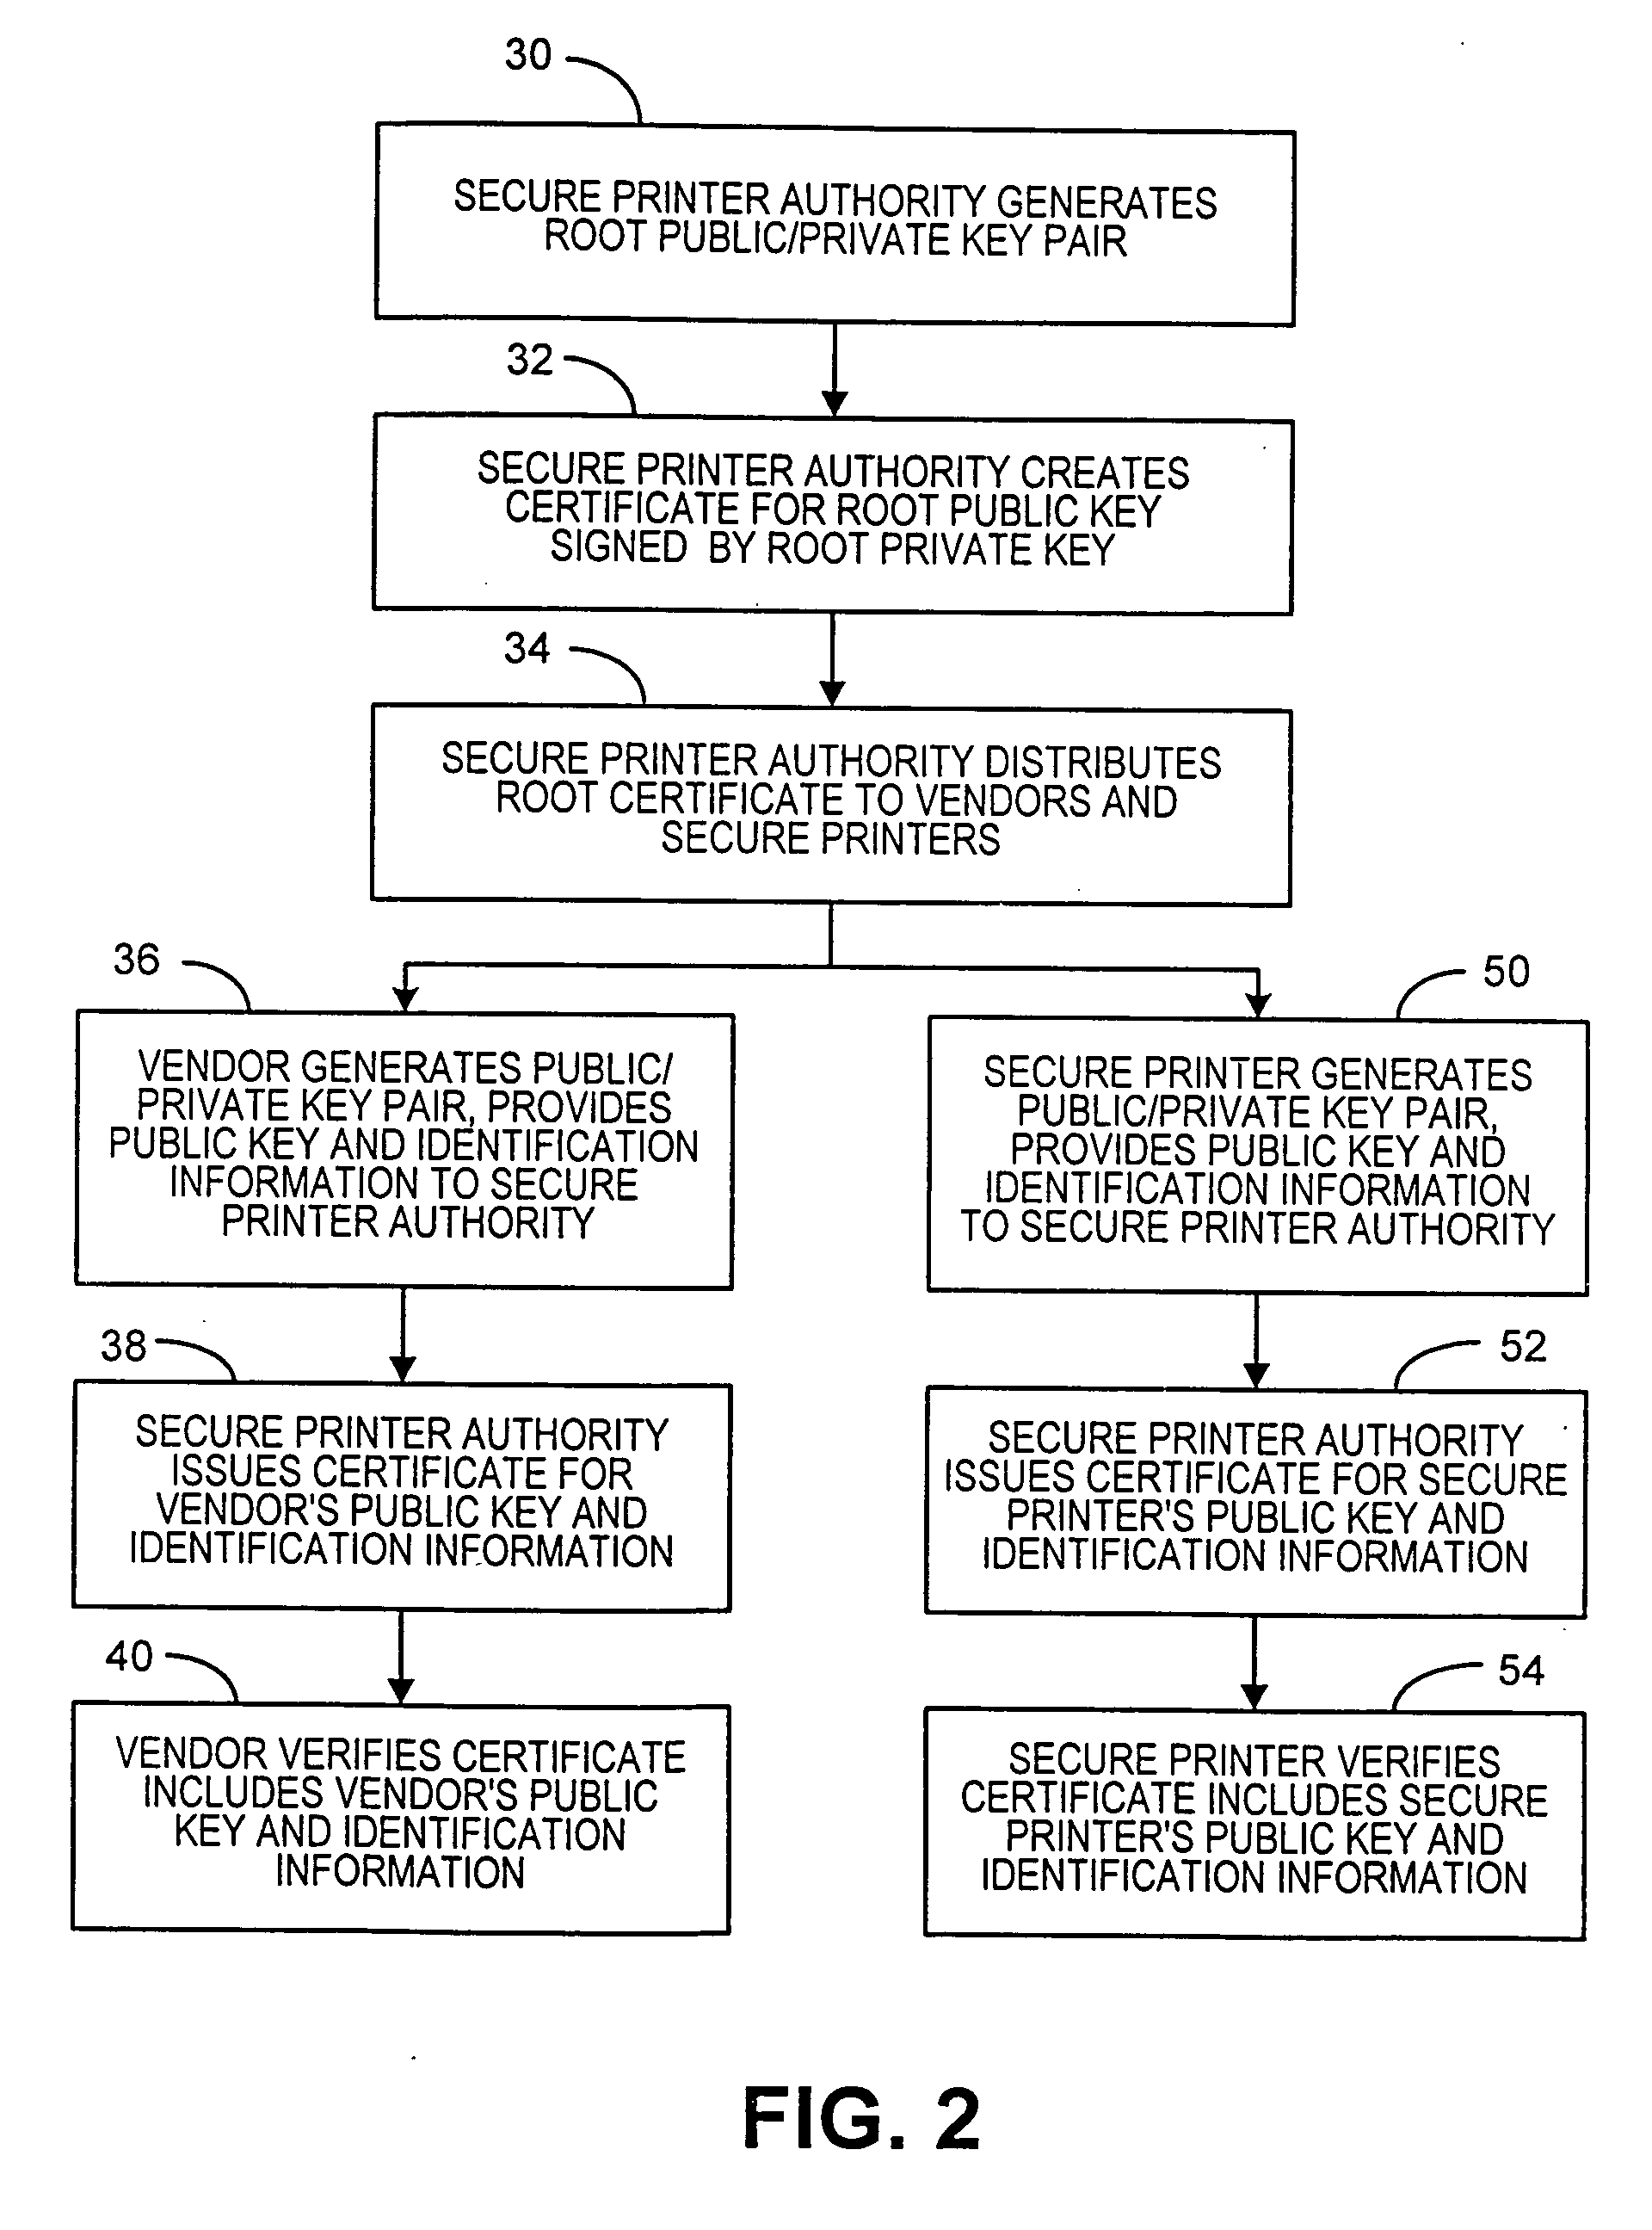 Method and system for printing transaction documents using a multi-vendor secure printer under control of a printer authority